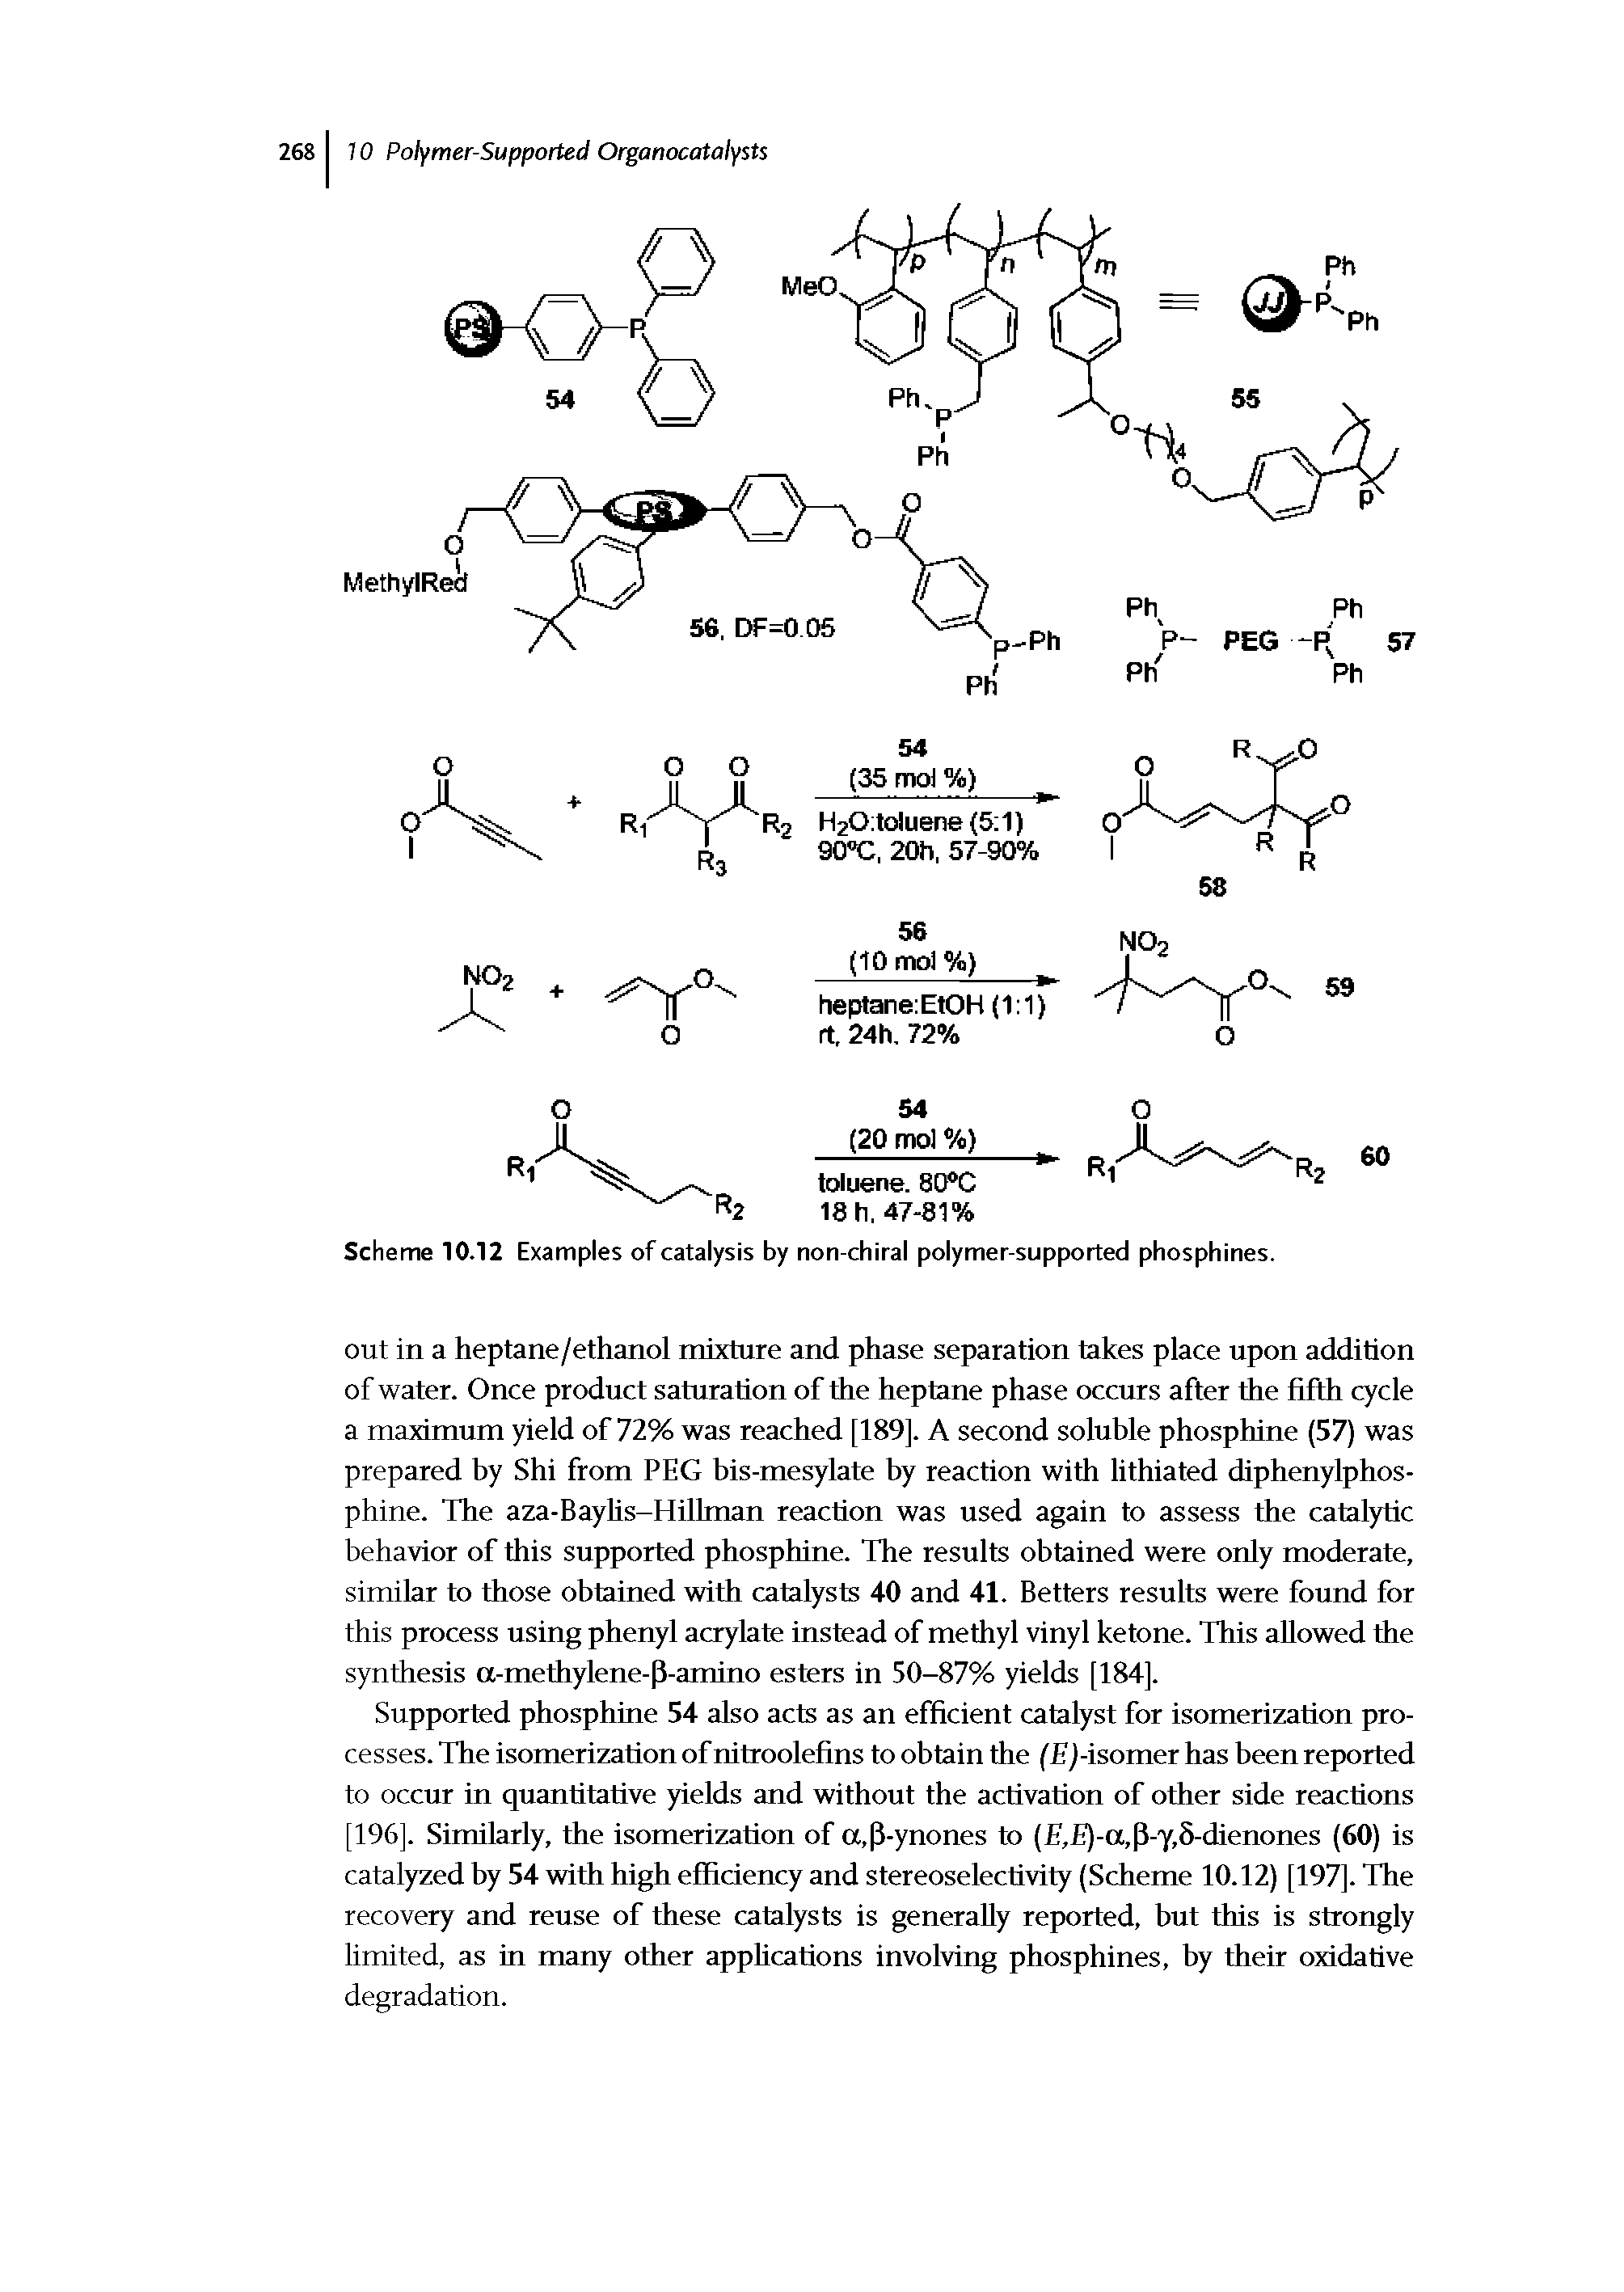 Scheme 10.12 Examples of catalysis by non-chiral polymer-supported phosphines.